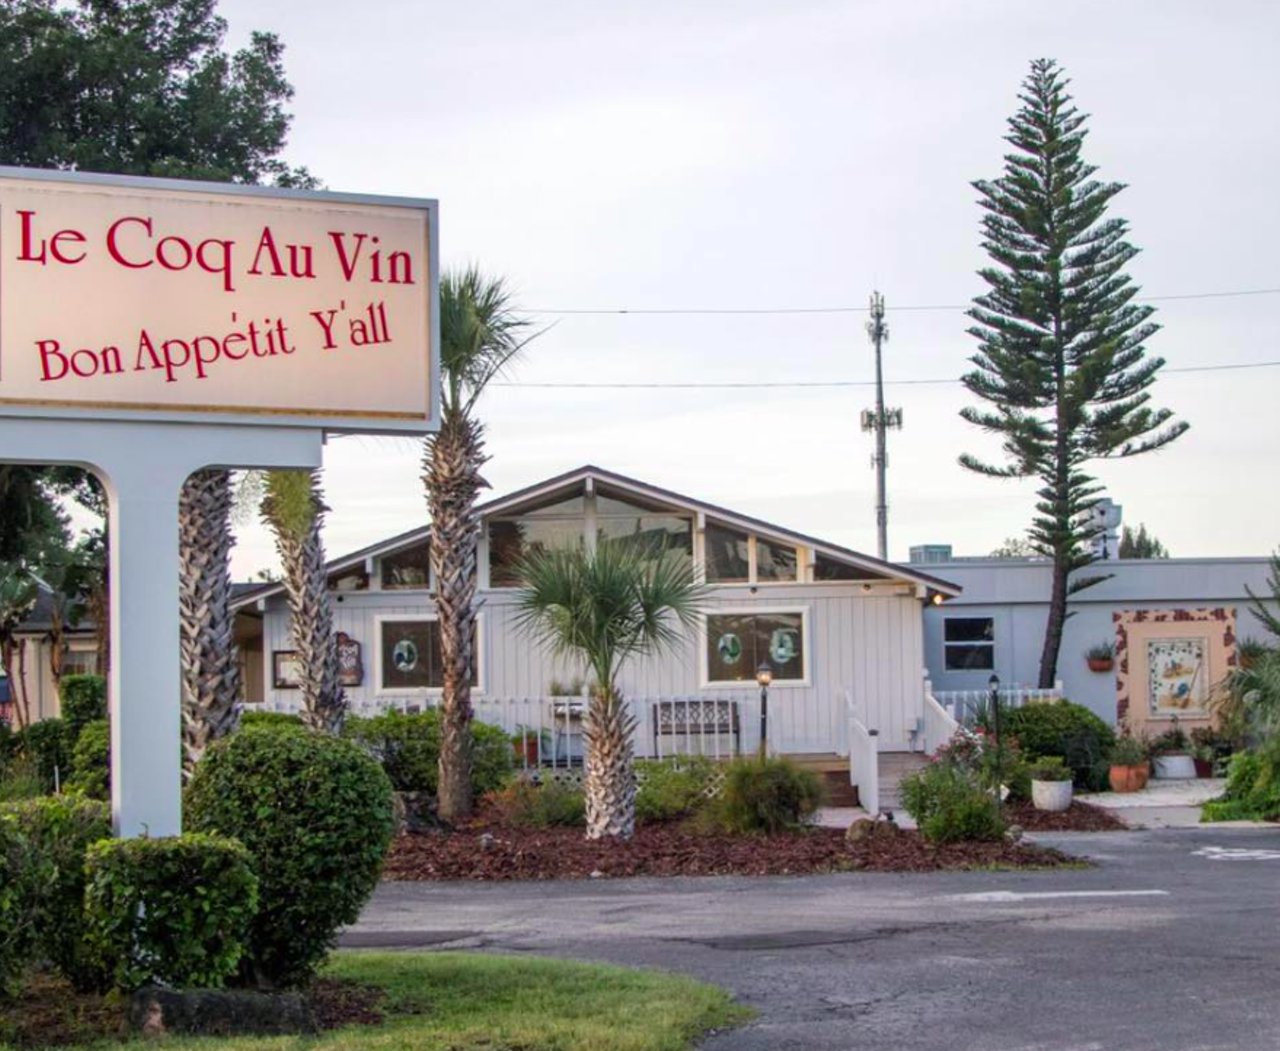 Le Coq Au Vin
4800 S. Orange Ave., Orlando
Orlando restaurant Le Coq au Vin, a local mainstay of French cuisine for nearly 50 years, closed its doors in May. The venerable eatery, winner of our Best of Orlando readers poll for "Best French Restaurant" in 2022, '21, '20 (and many years before that), ceased operations with a final Saturday dinner service. Owner and chef Reimund Pitz put his decision down to rising food costs and declines in business due to the COVID pandemic.